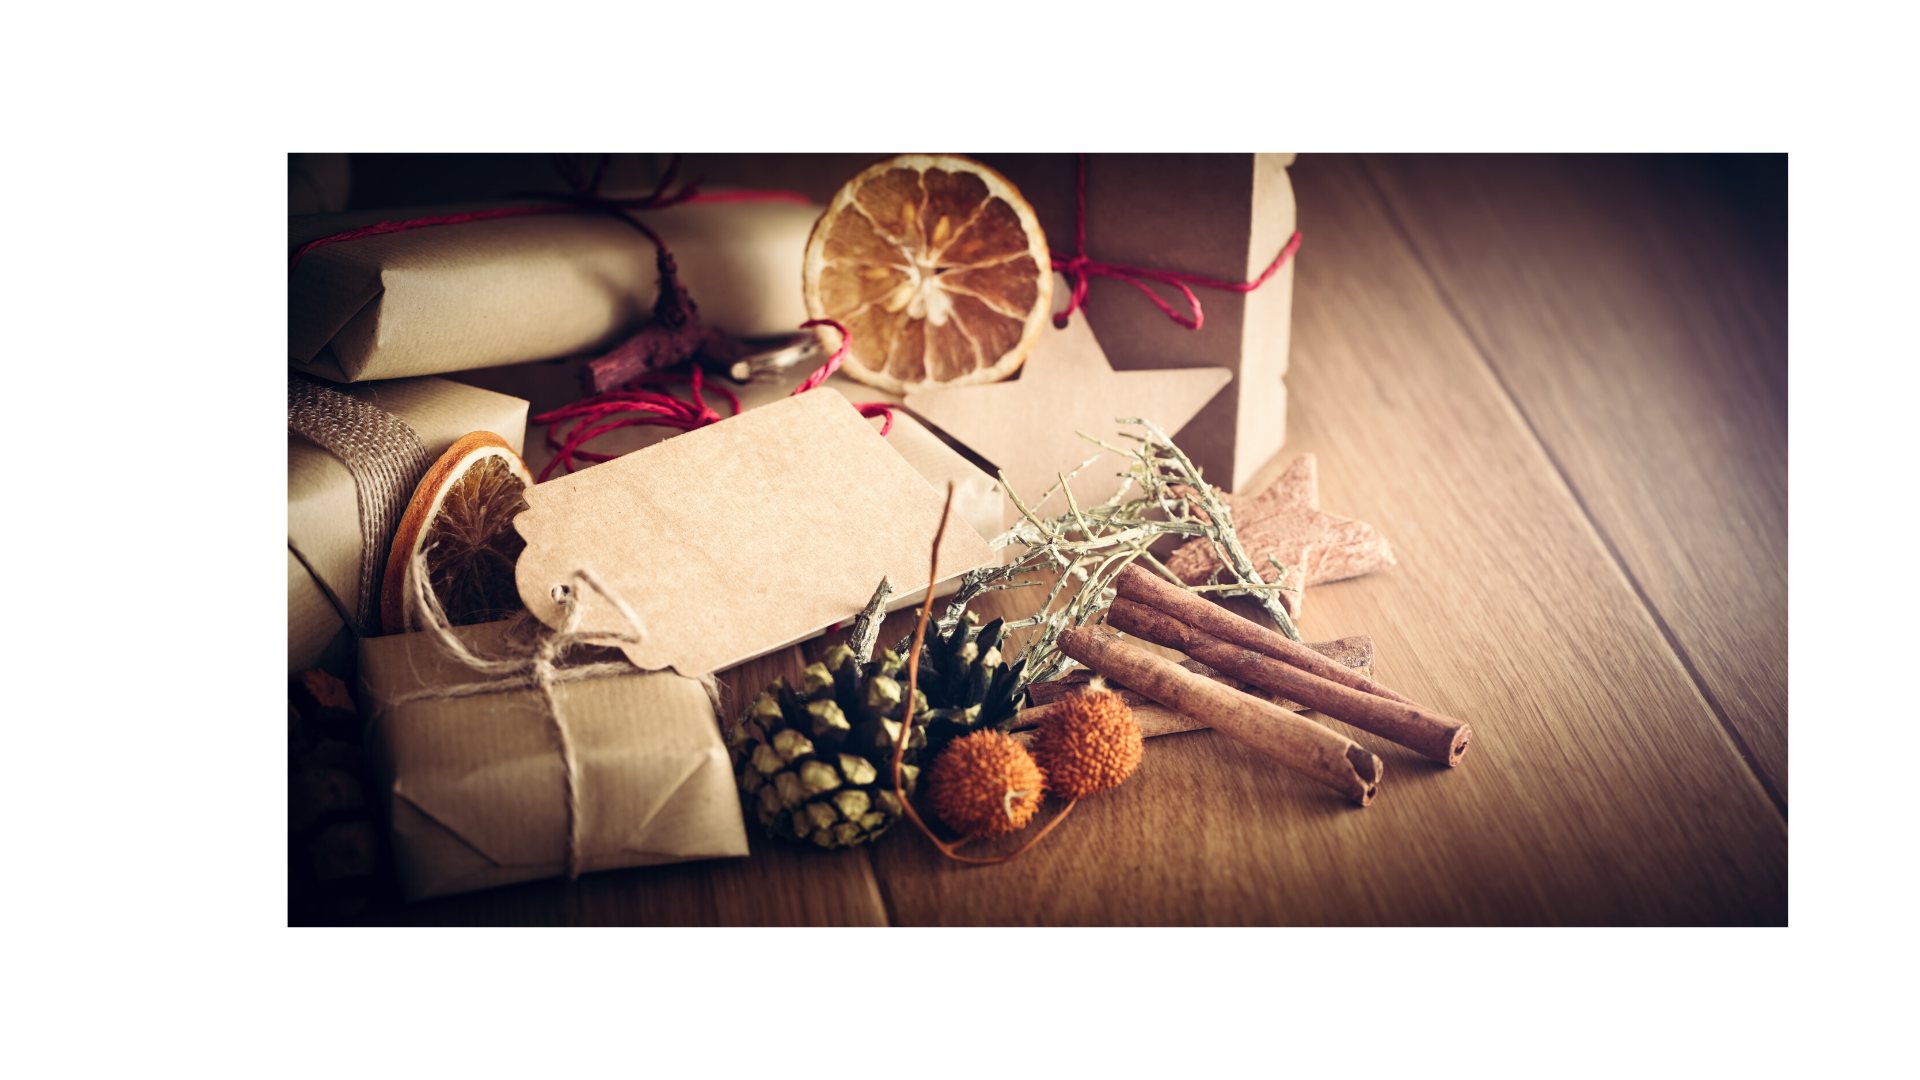 eco-friendly gift ideas for Christmas